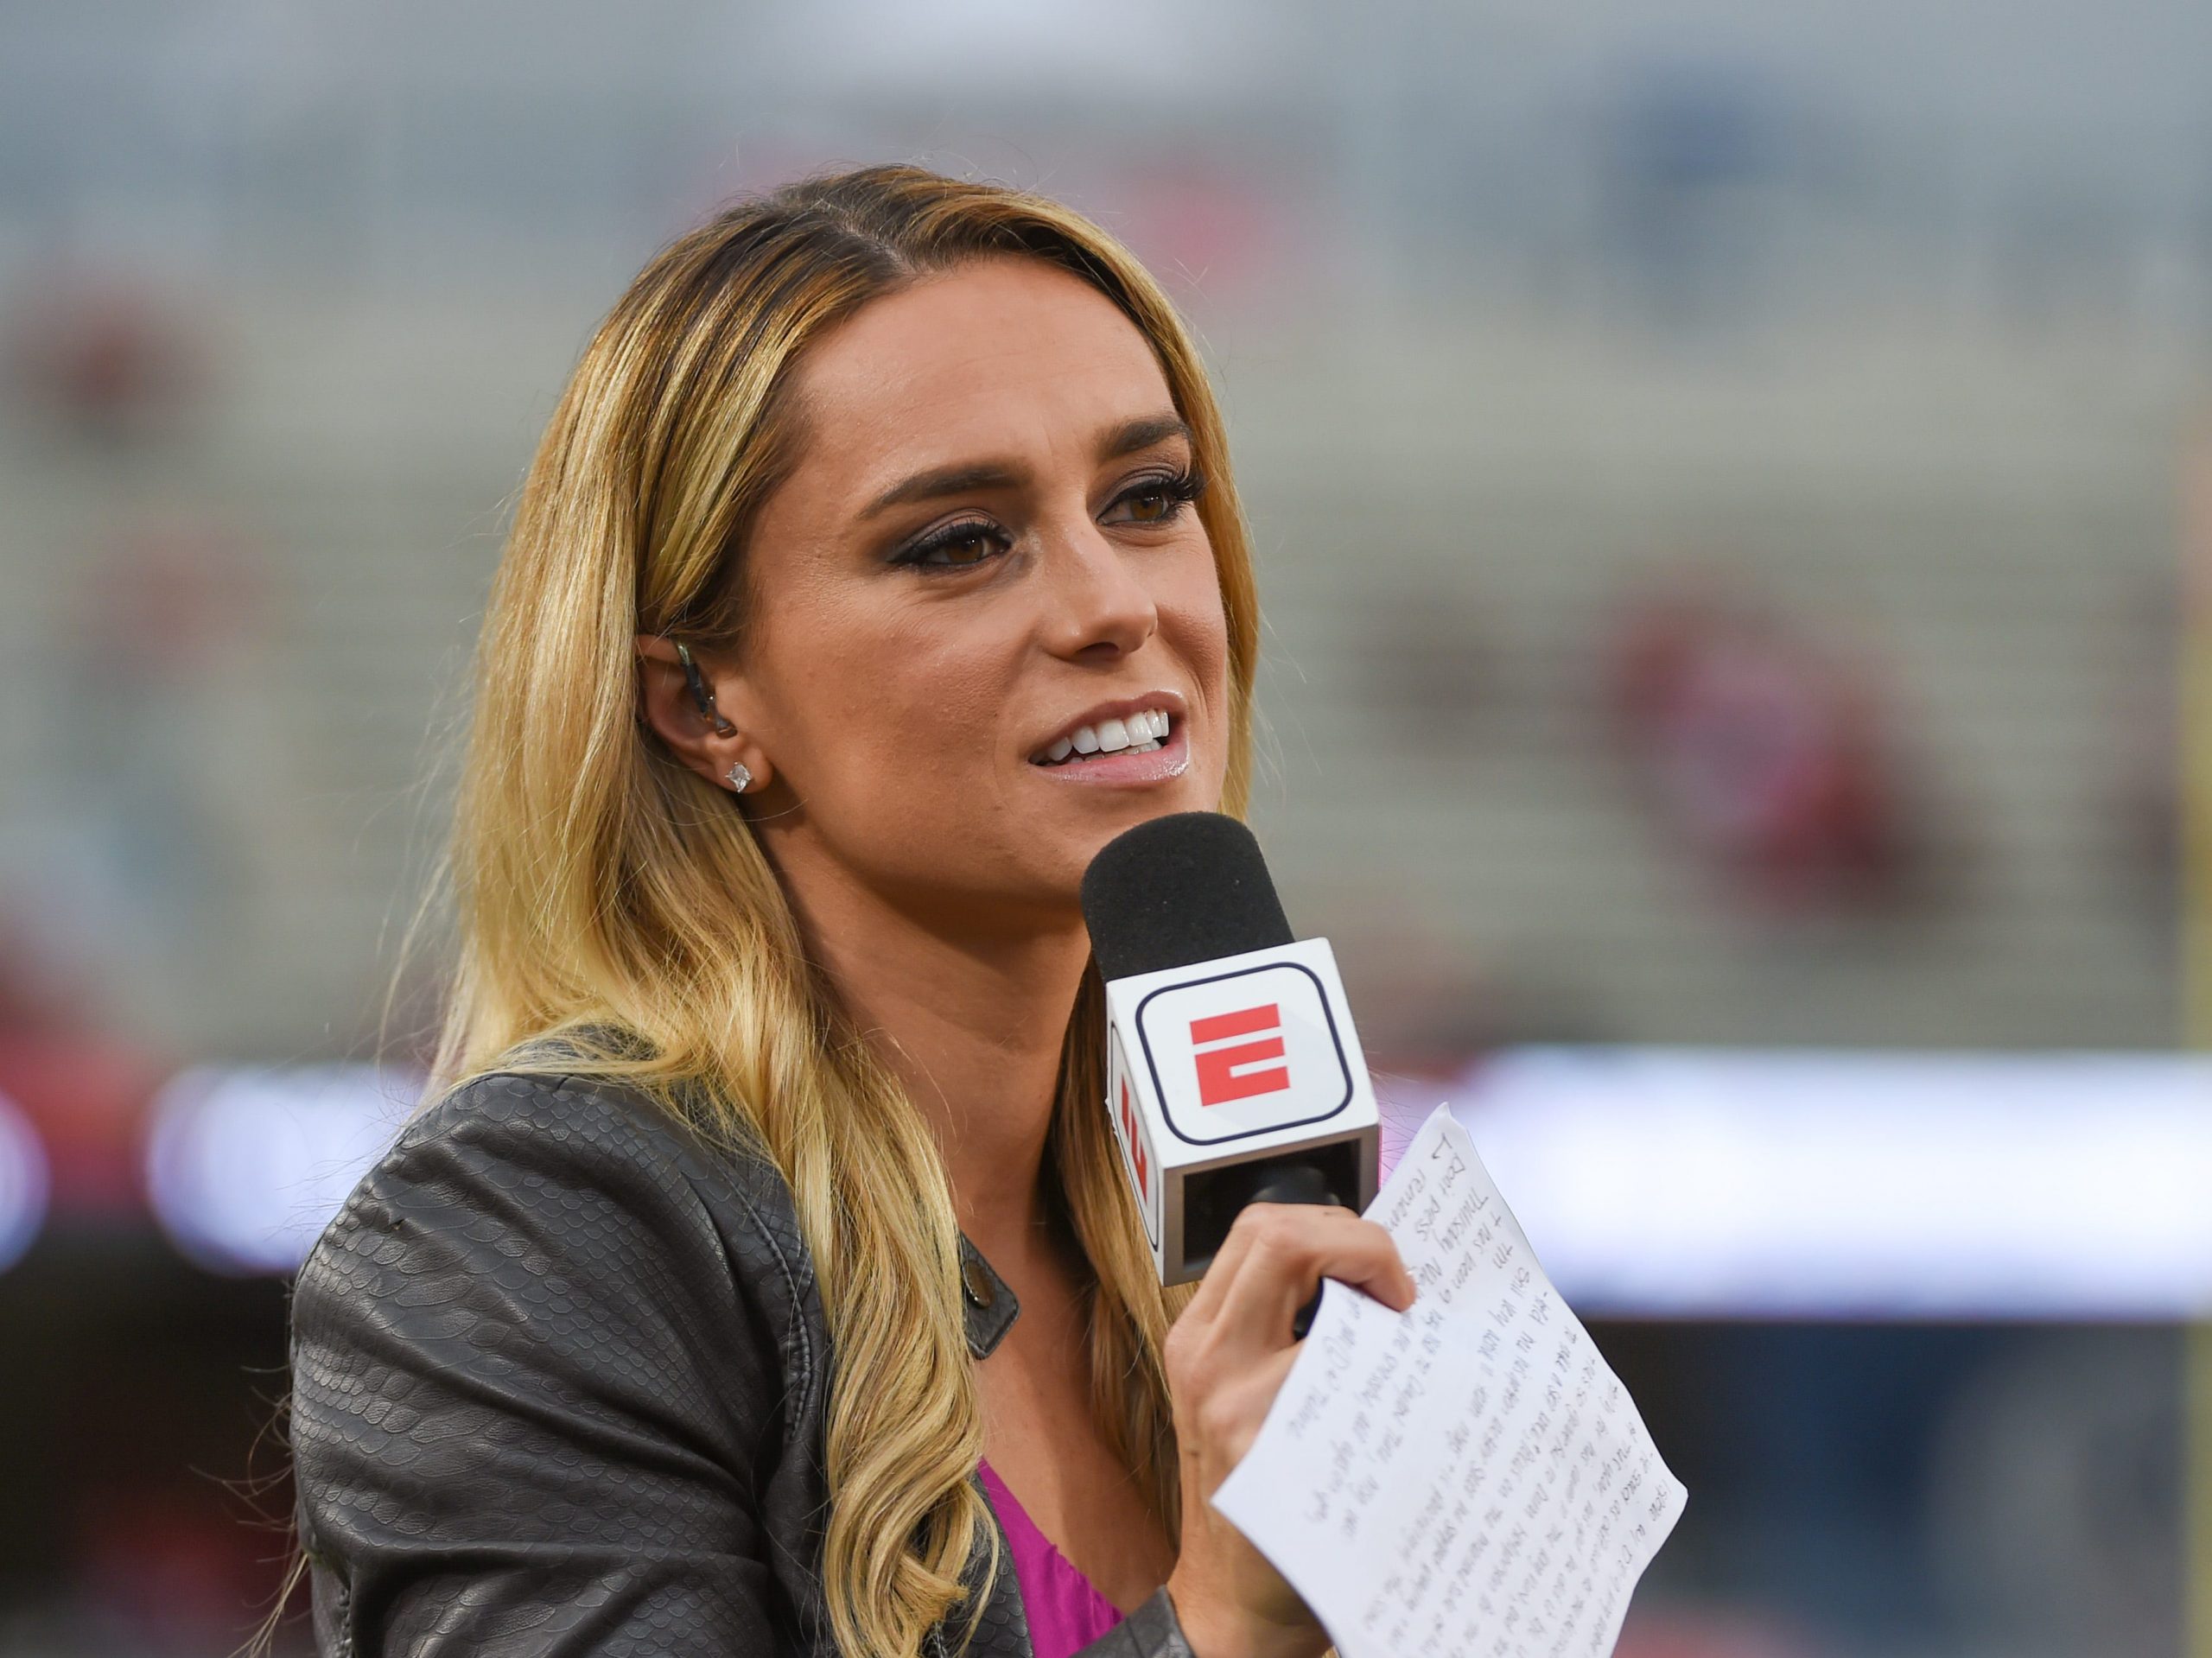 ESPN reporter Molly McGrath opened up about the realities of pregnancy after a troll body shamed her.